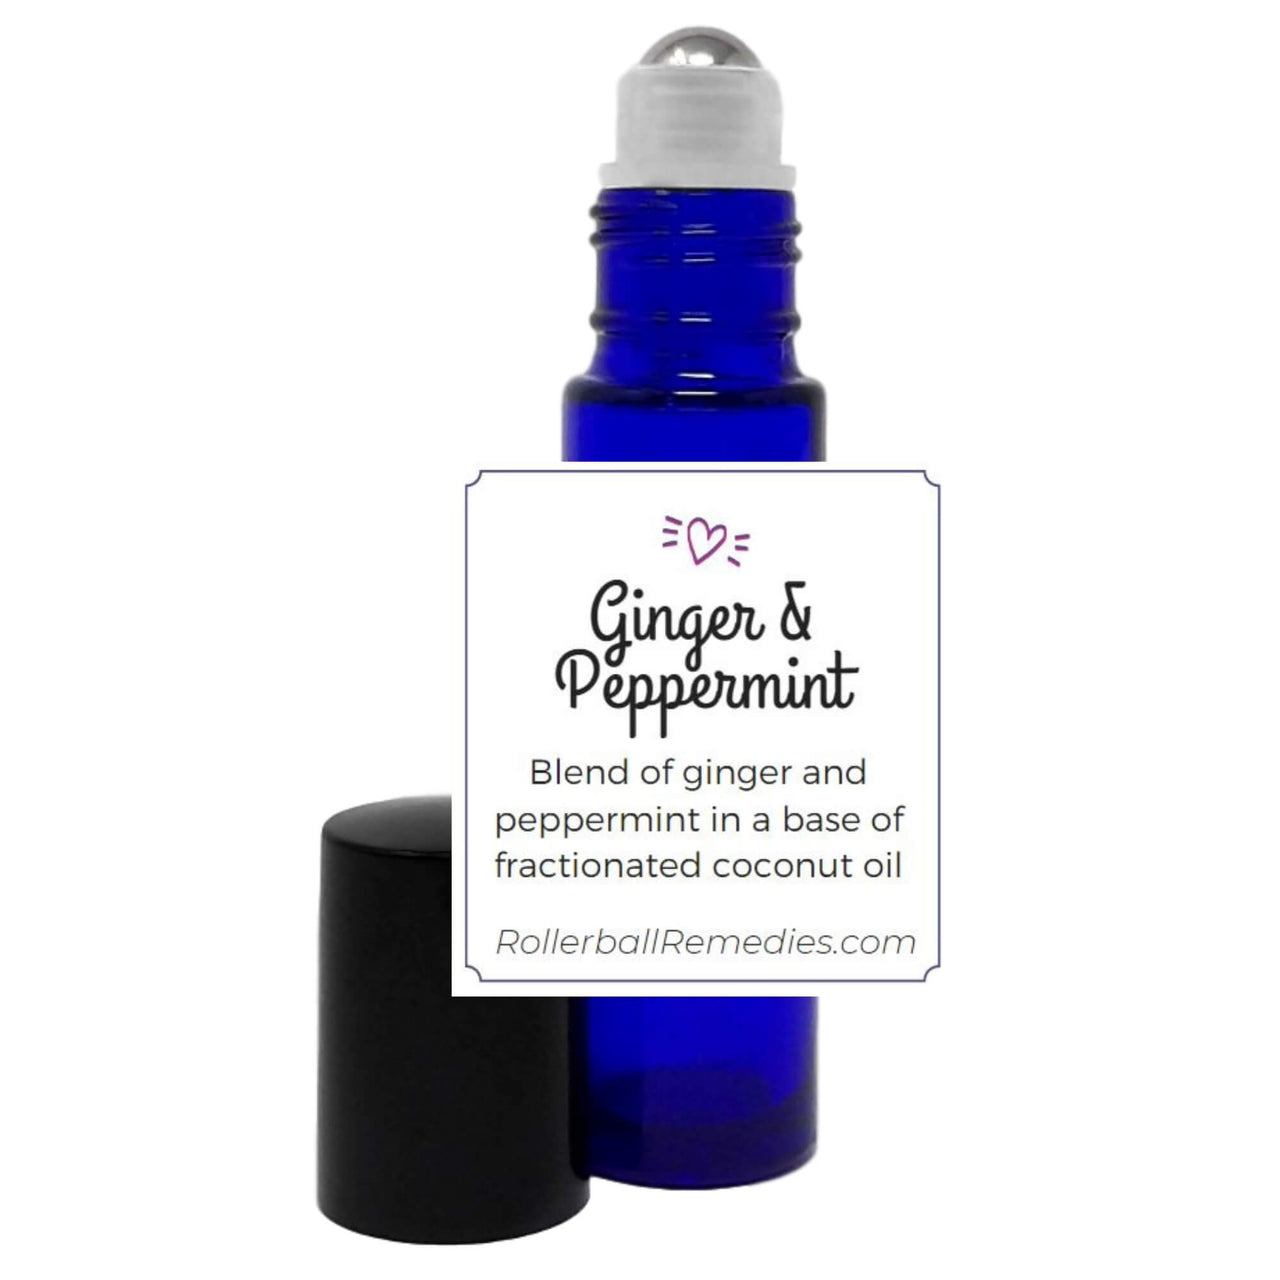 Ginger and Peppermint Essential Oil Blend - 10 ml Roller Bottle Aromatherapy Oils for Nausea, Upset Stomach, Digestive Support